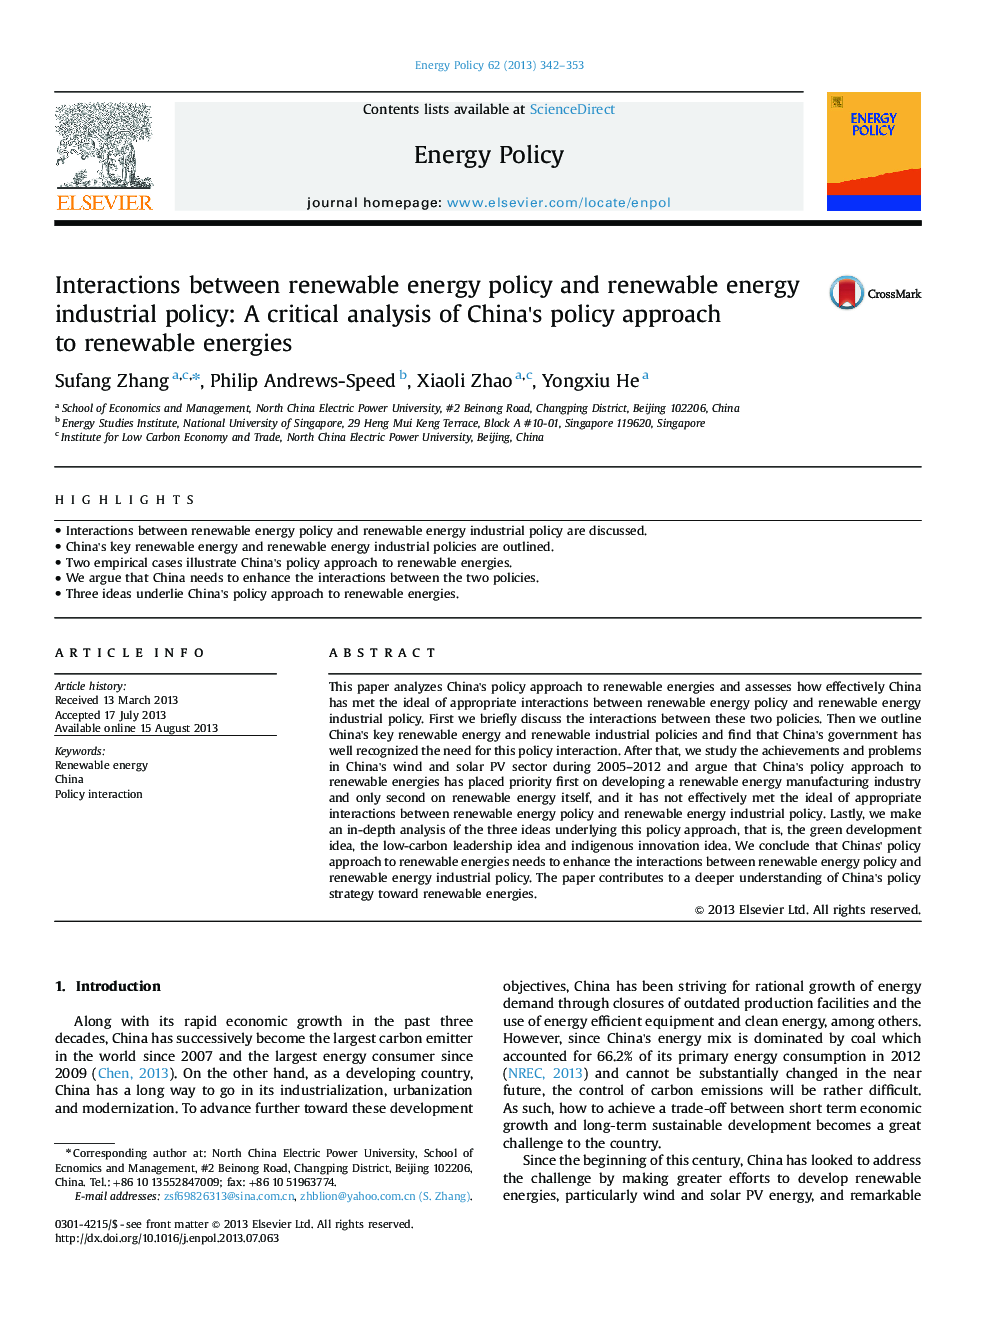 Interactions between renewable energy policy and renewable energy industrial policy: A critical analysis of China's policy approach to renewable energies